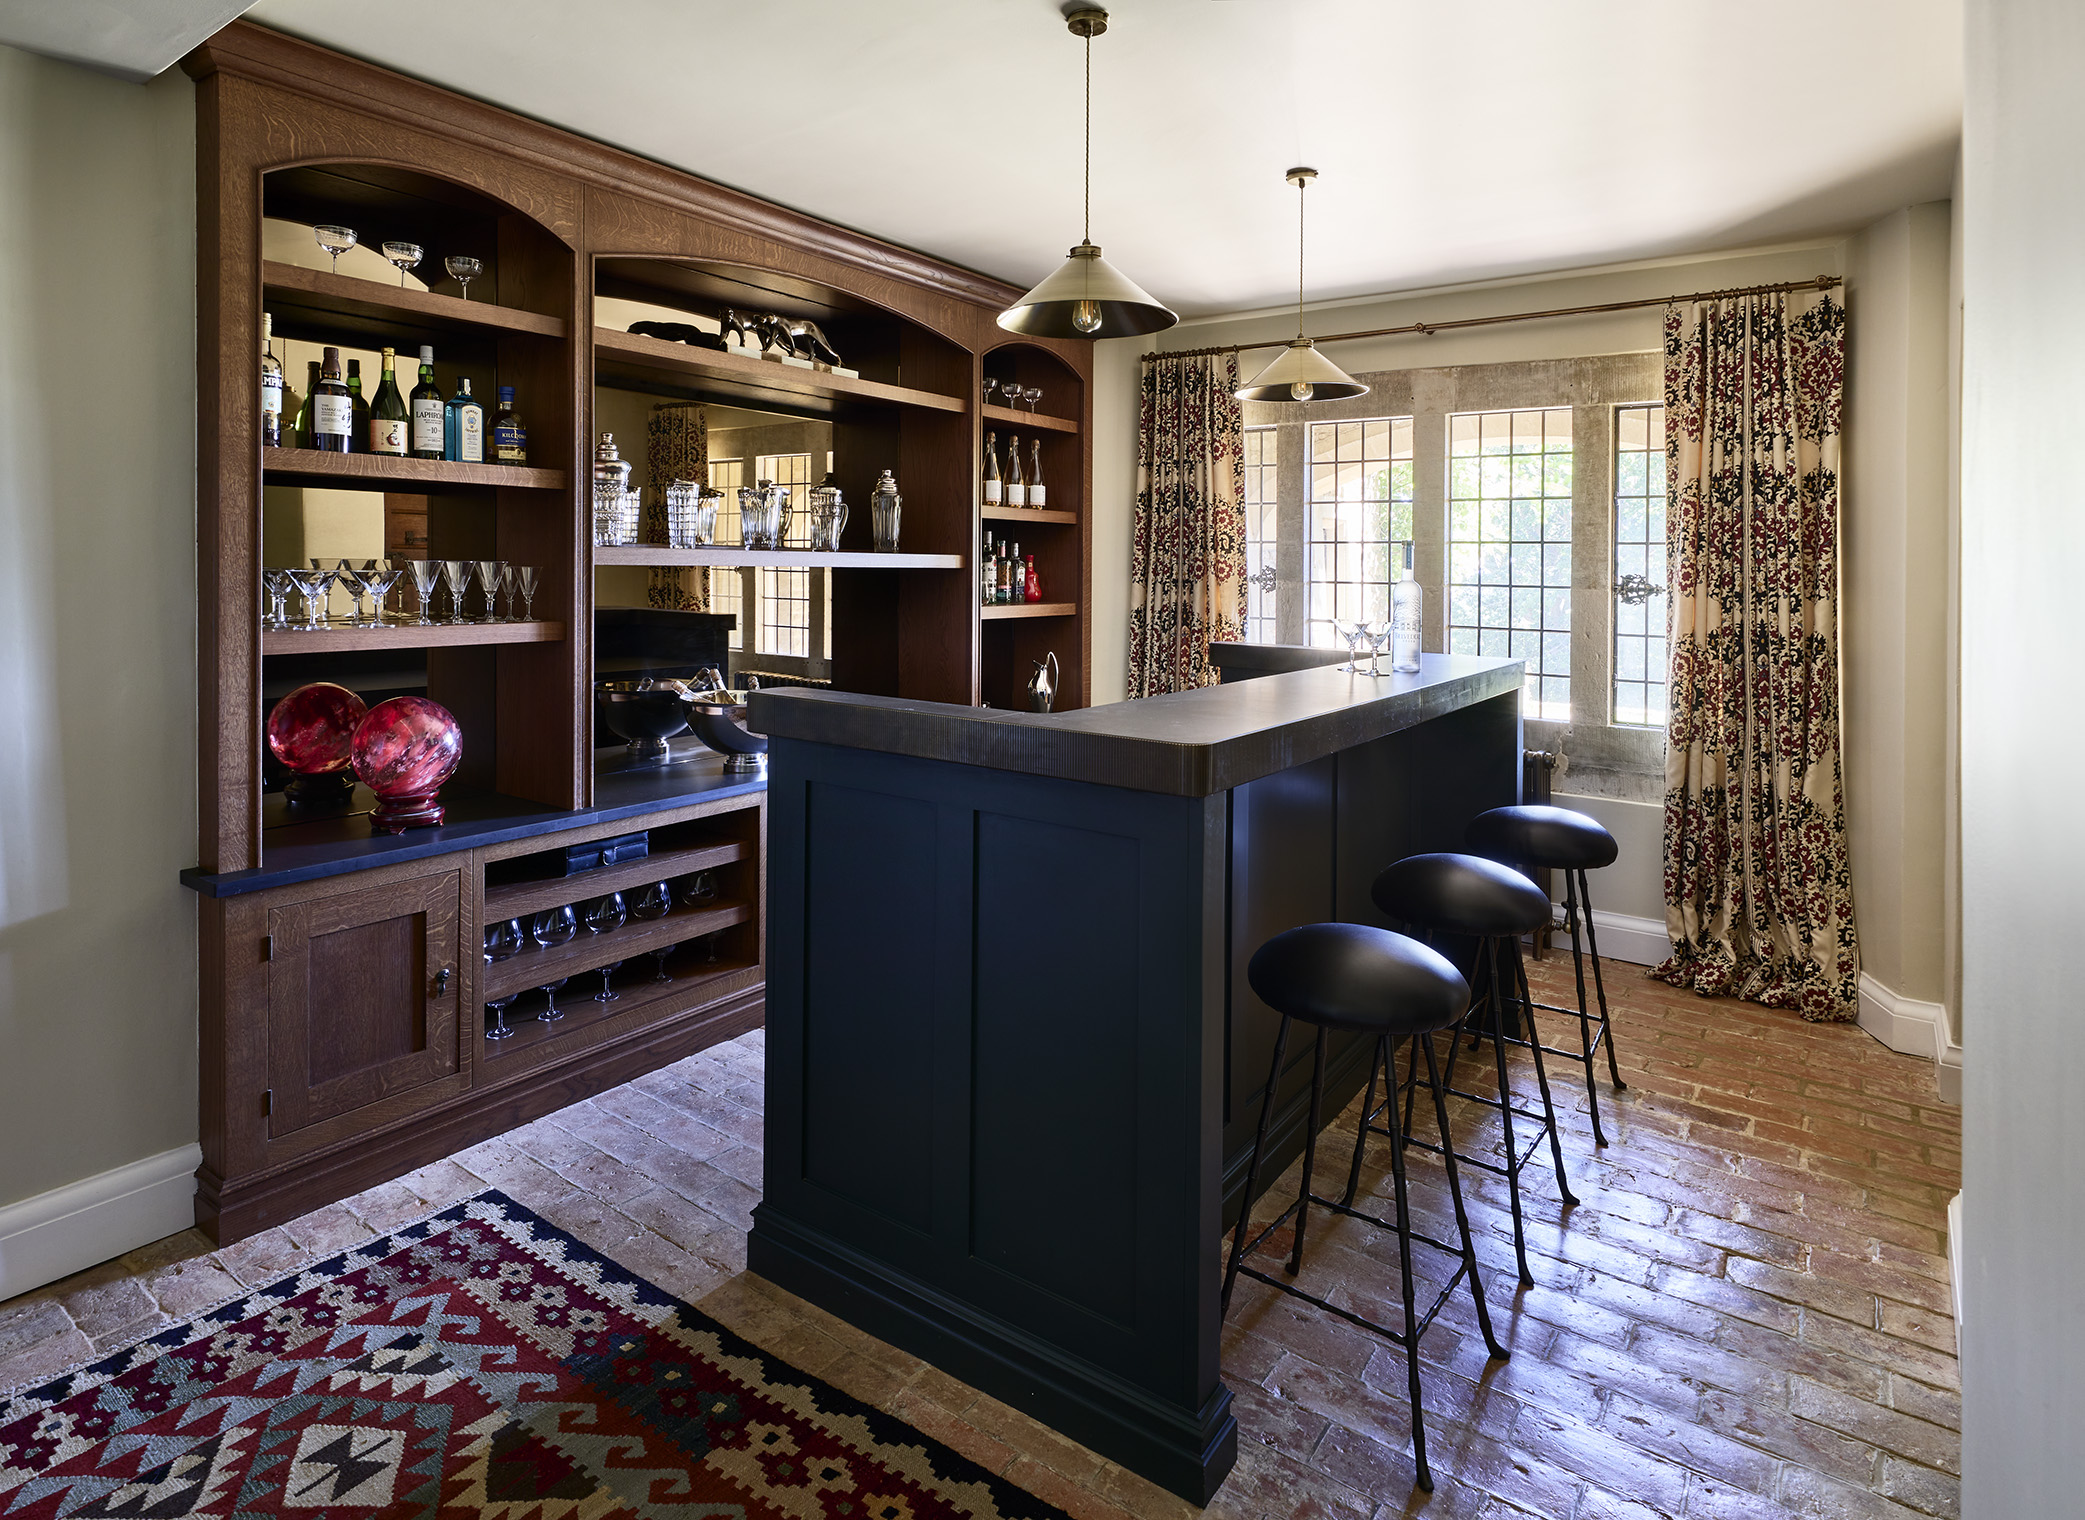 A home bar in dark oak and dark grey lacquer with 3 bar stools and a bar-top